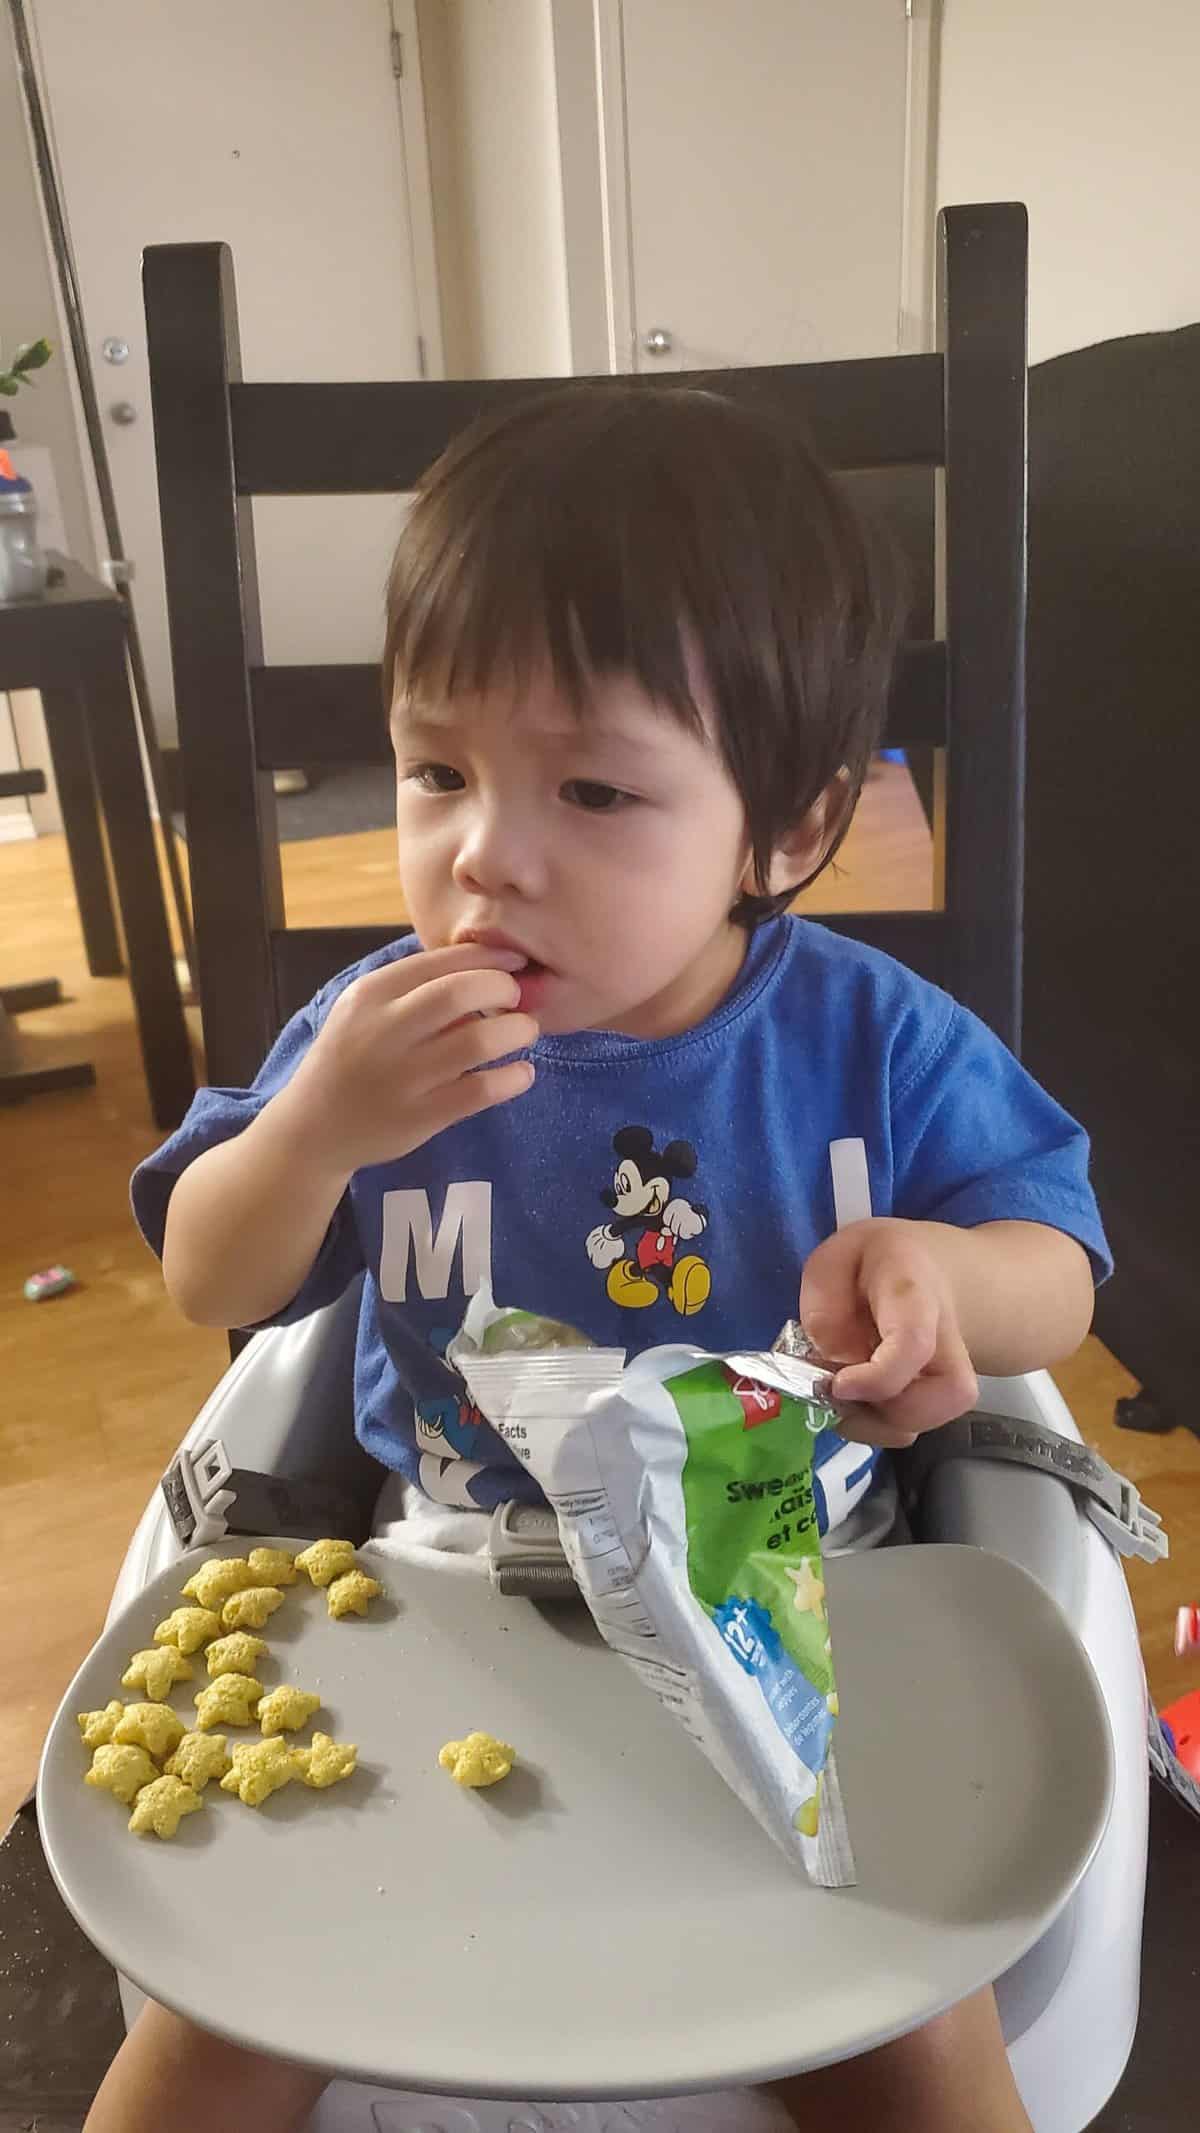 Baby boy eating snack.